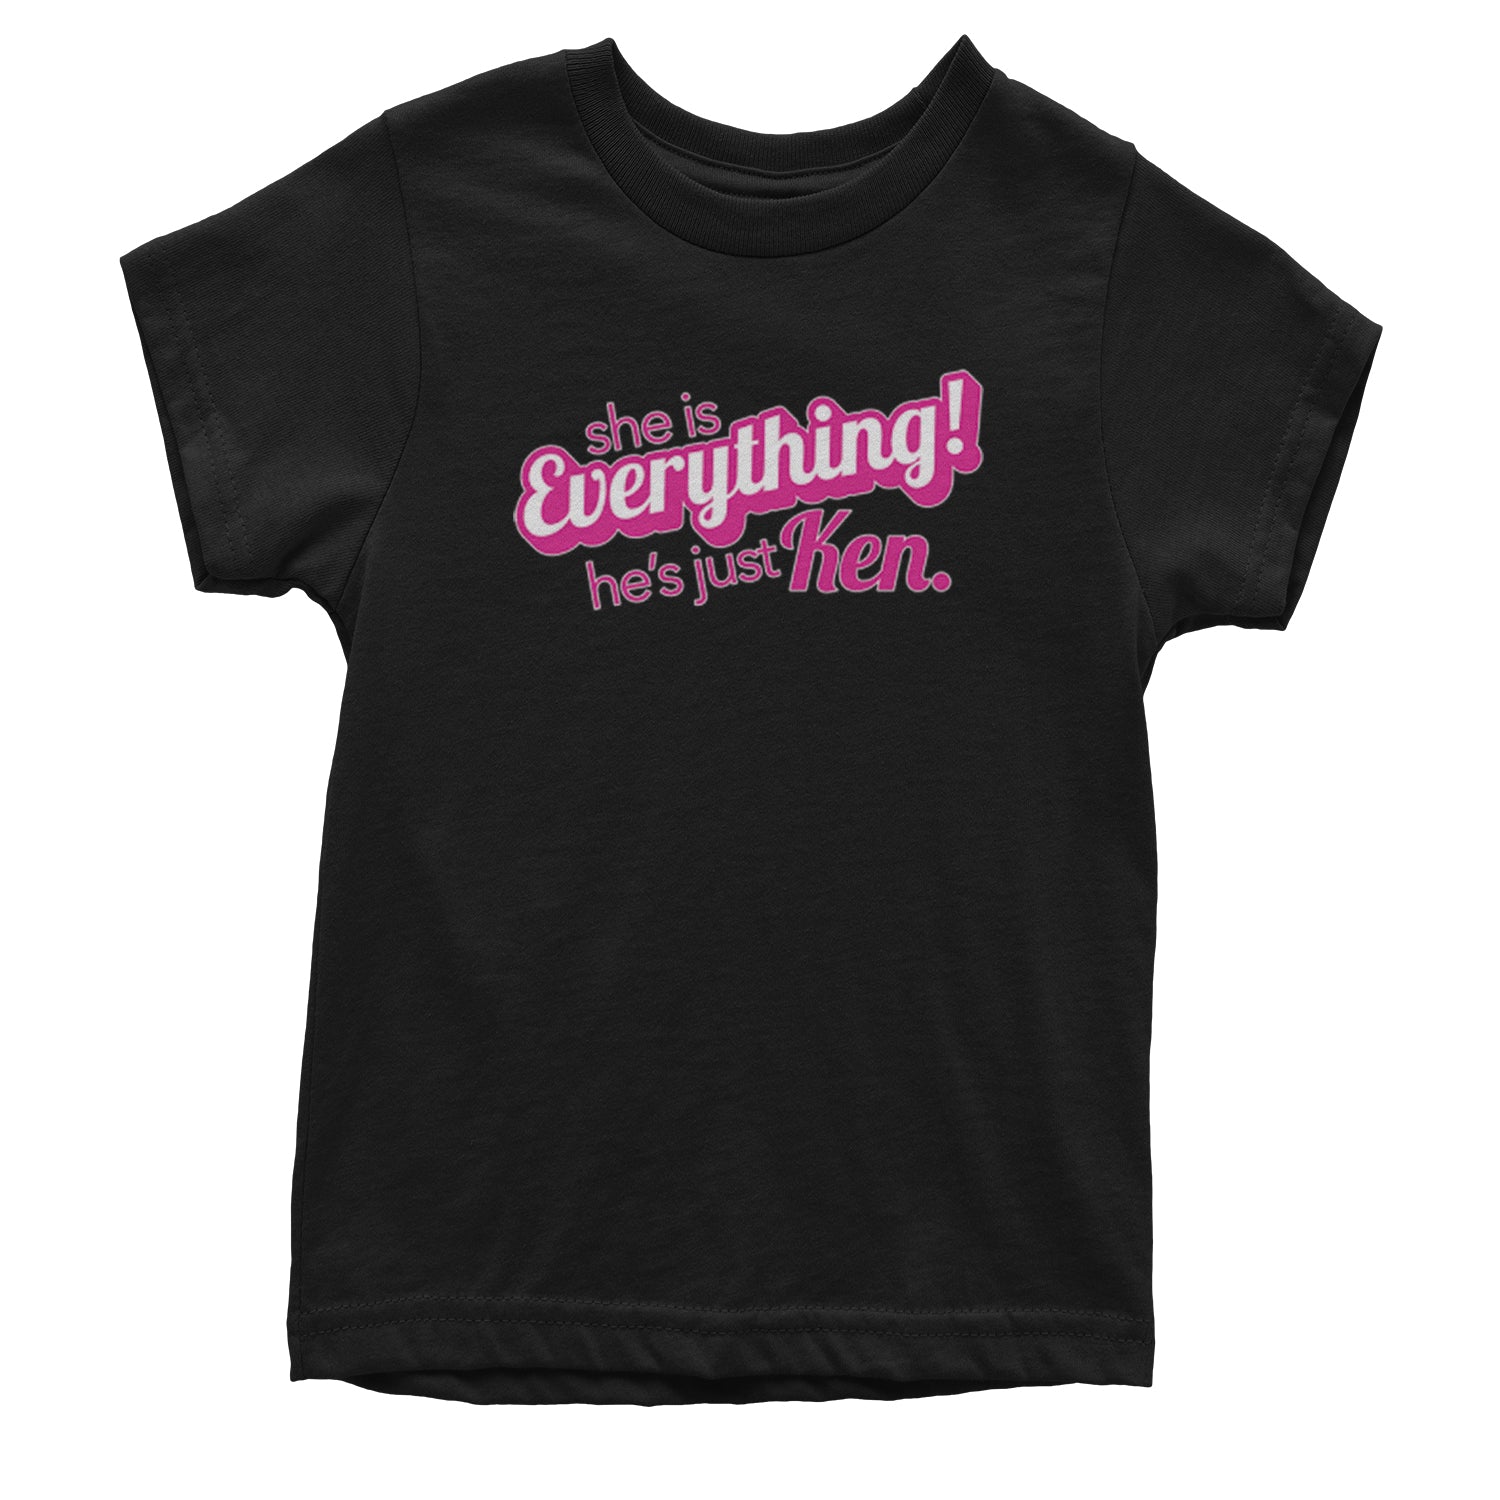 She's Everything, He's Just Ken Youth T-shirt